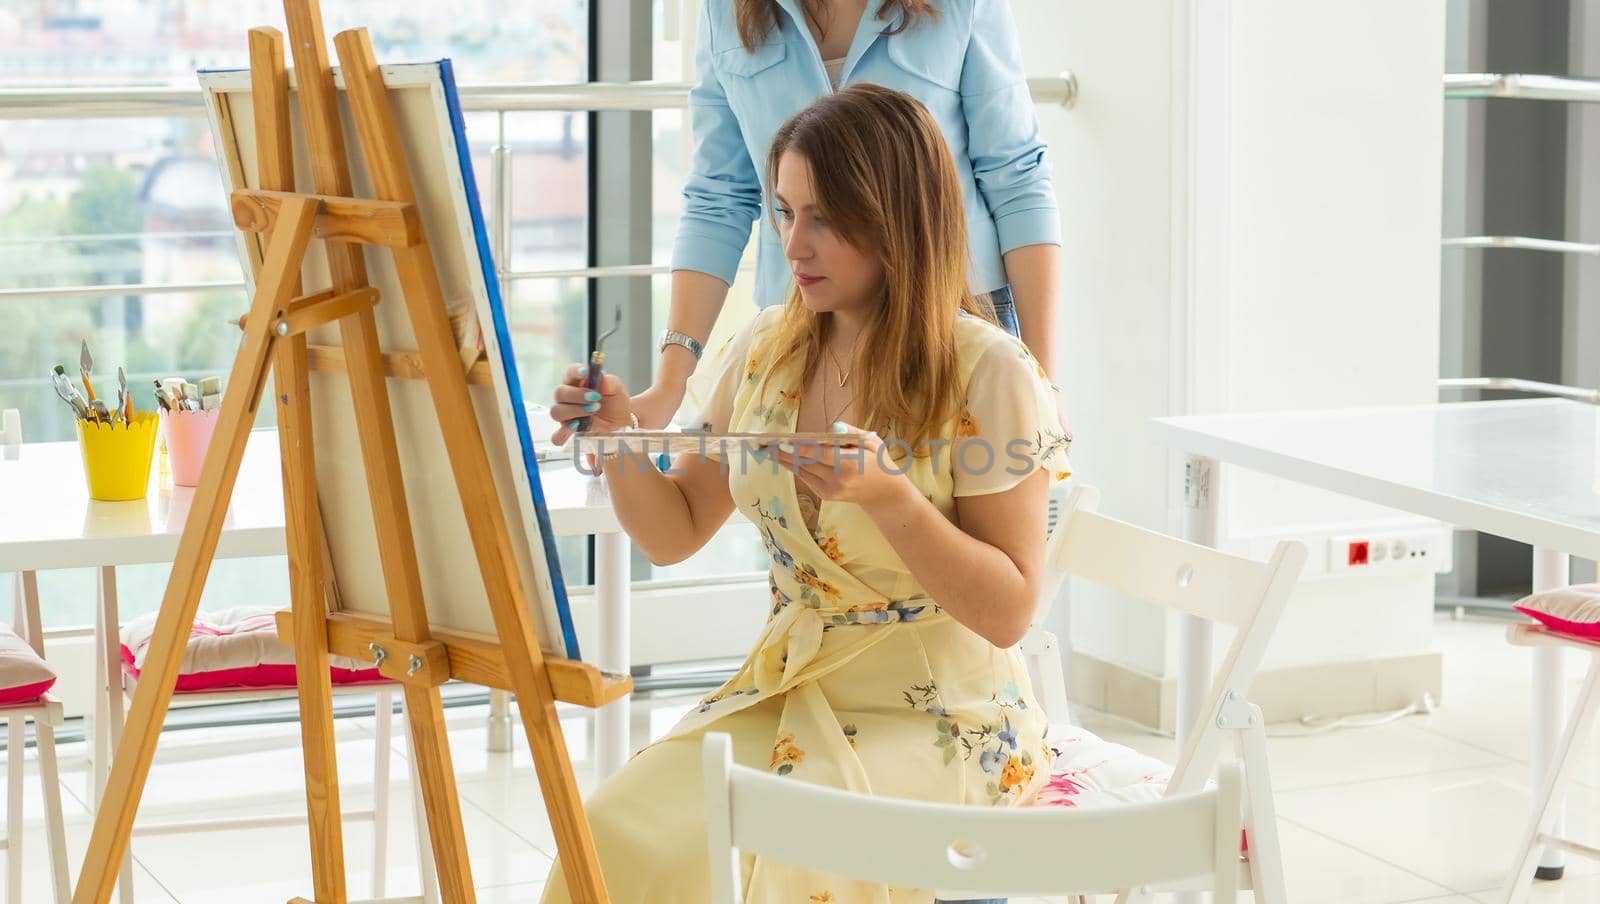 School of art, college of arts, education for group of young students. Happy young woman smiling, girl learning to paint with teacher. by Satura86